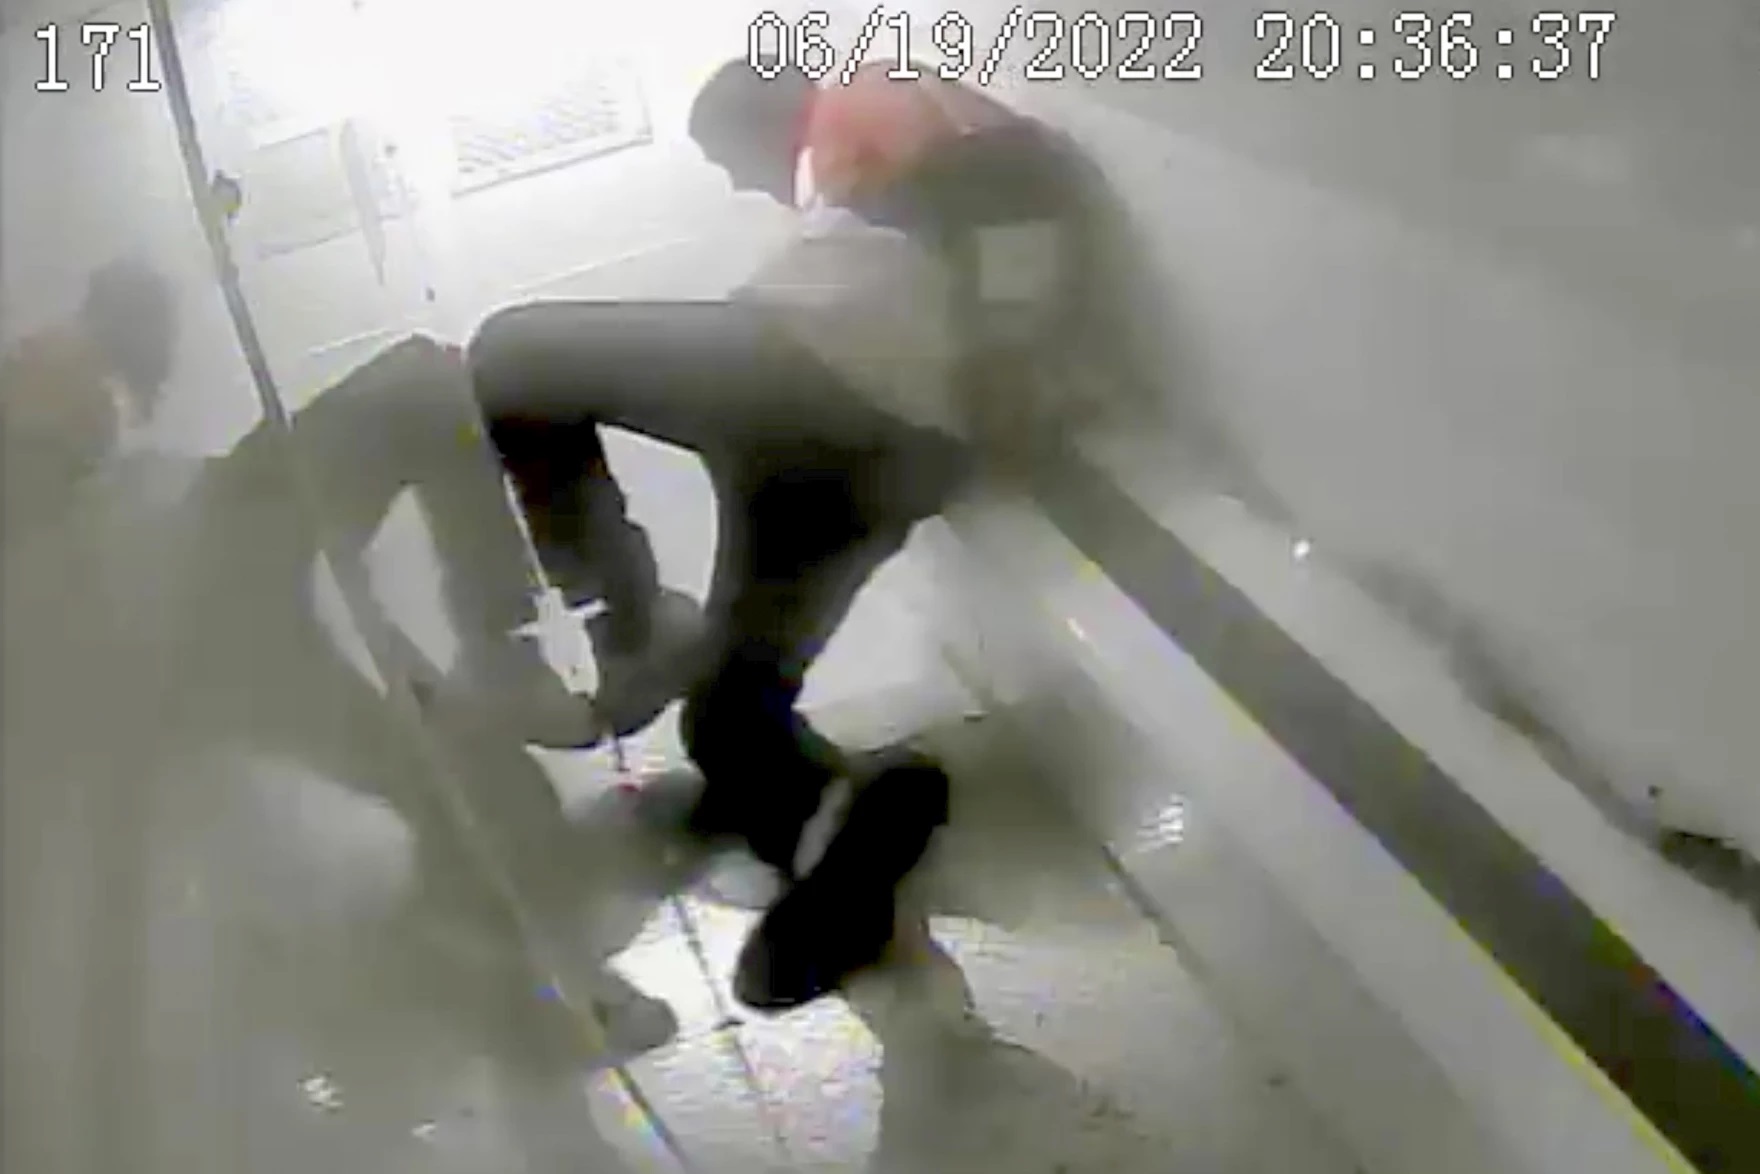 A screenshot from New Haven Police Department video shows handcuffed 36-year-old Richard Randy Cox